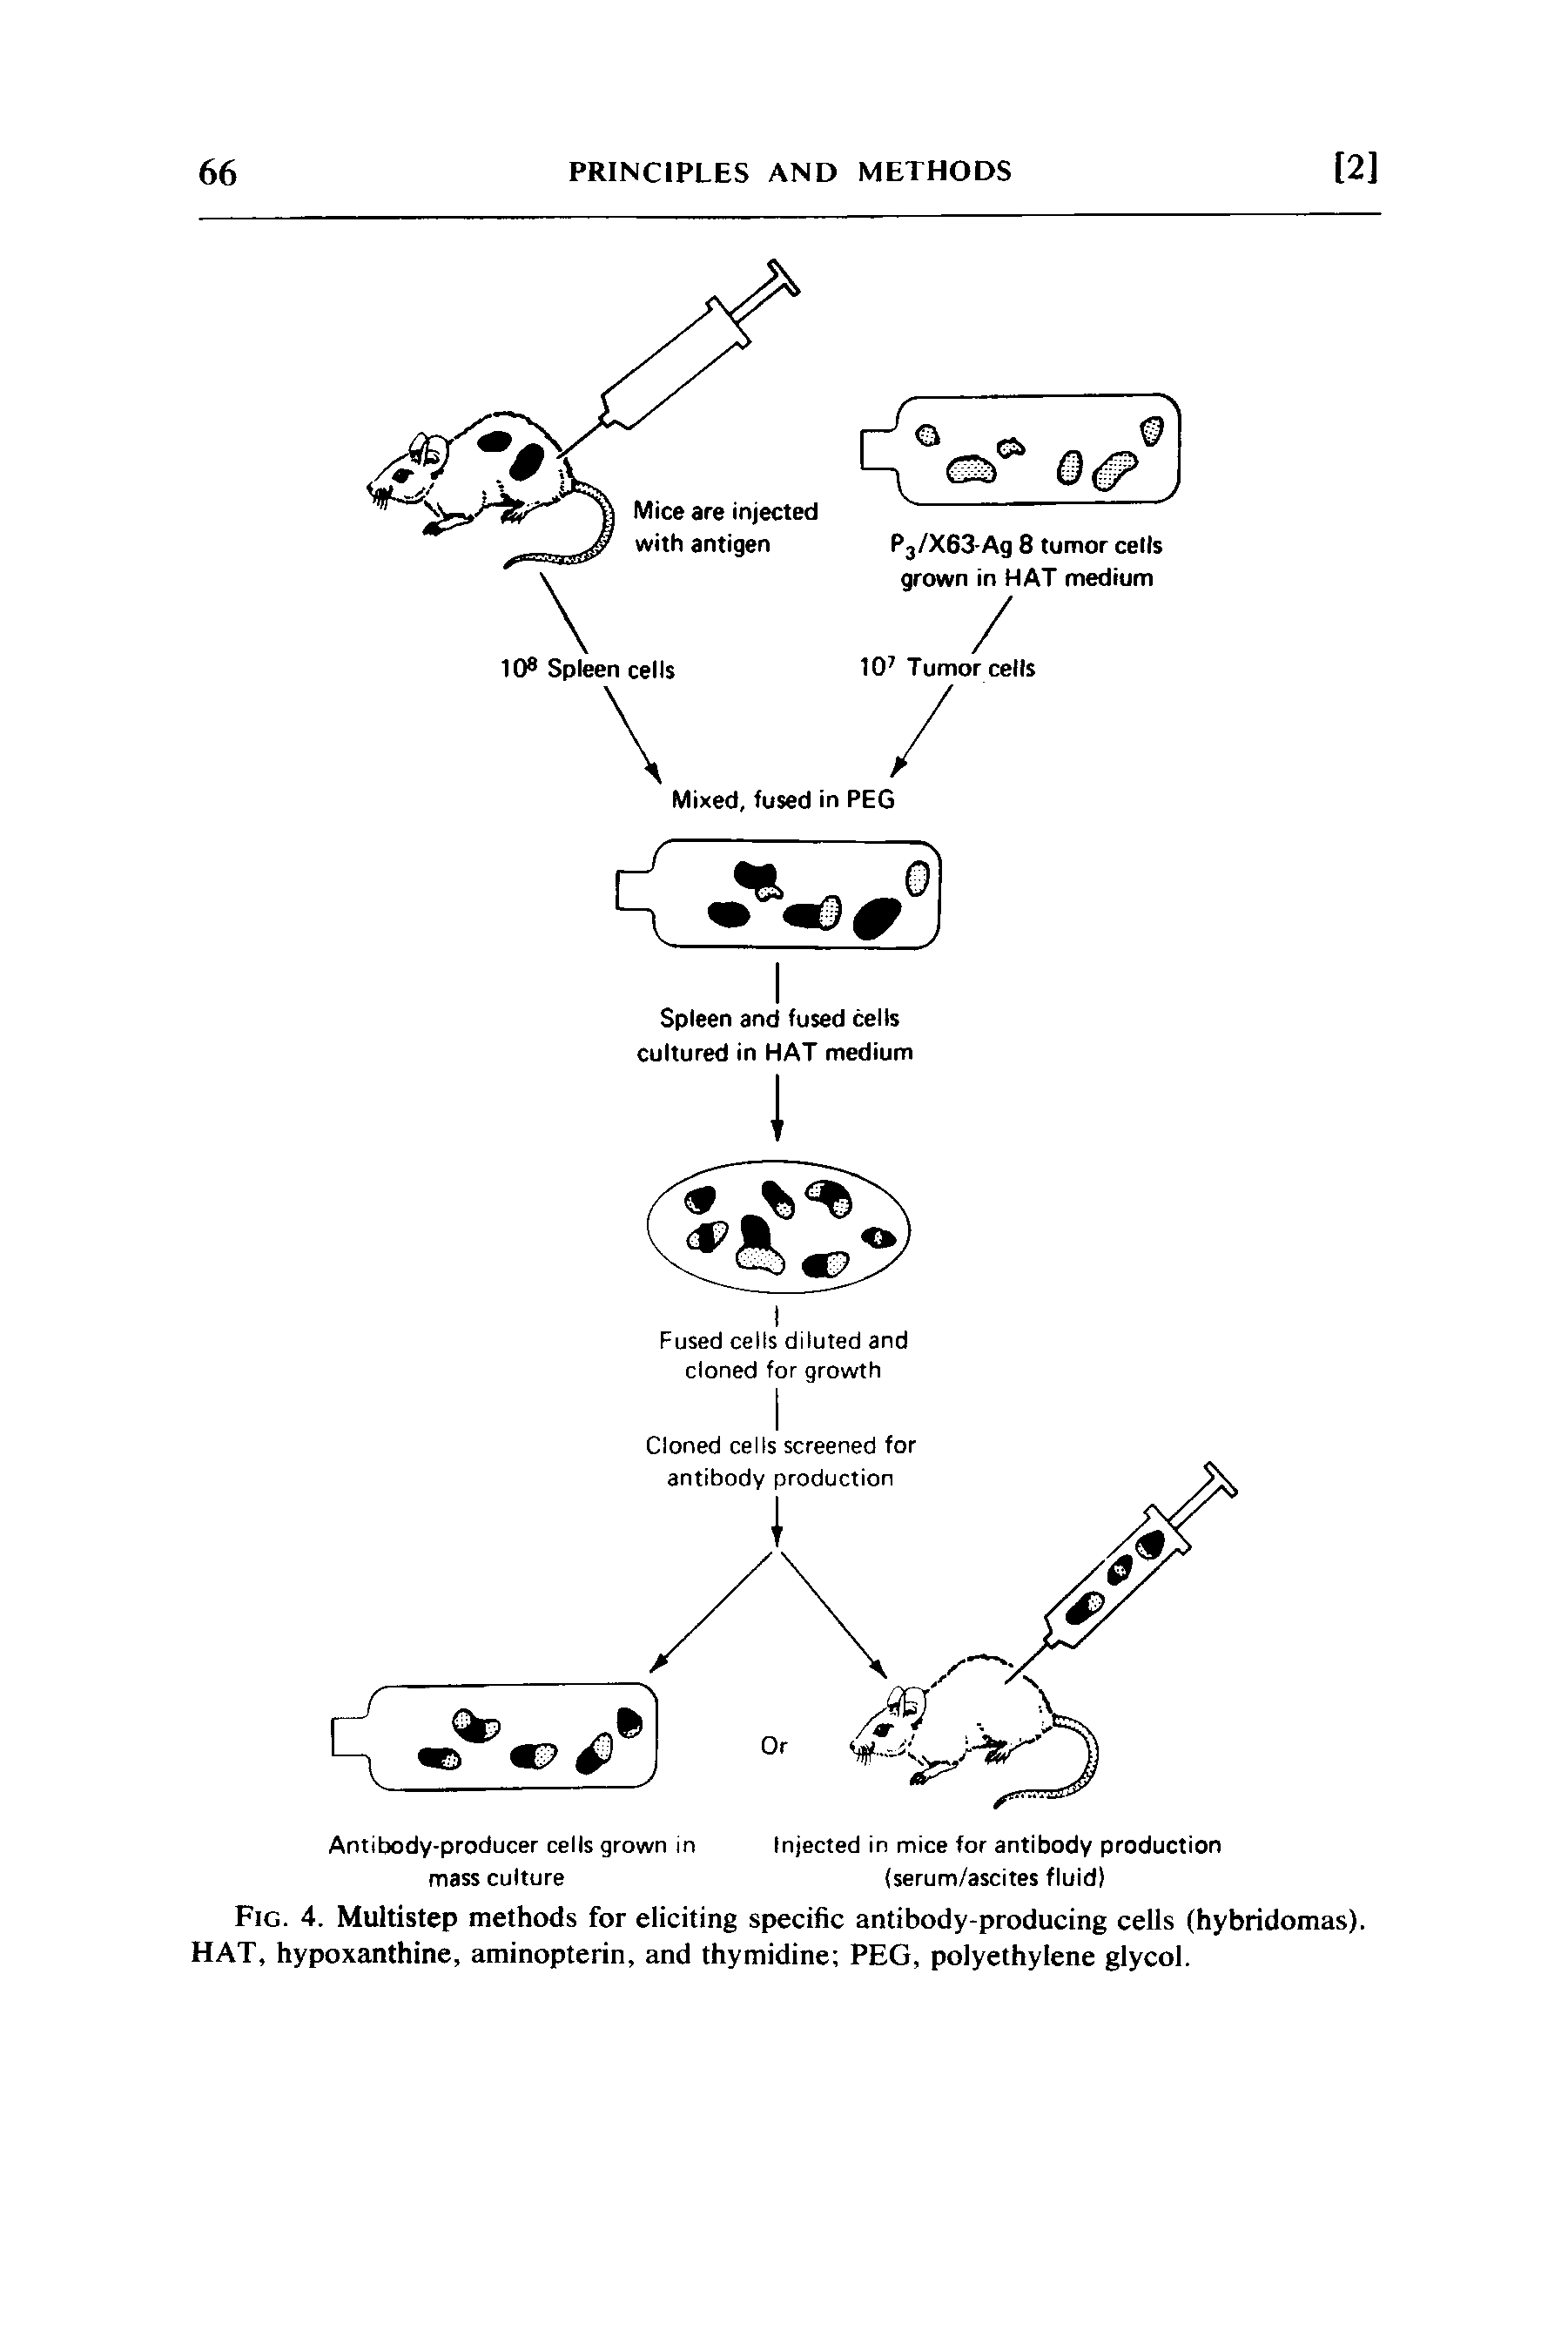 Fig. 4. Multistep methods for eliciting specific antibody-producing cells (hybridomas). HAT, hypoxanthine, aminopterin, and thymidine PEG, polyethylene glycol.